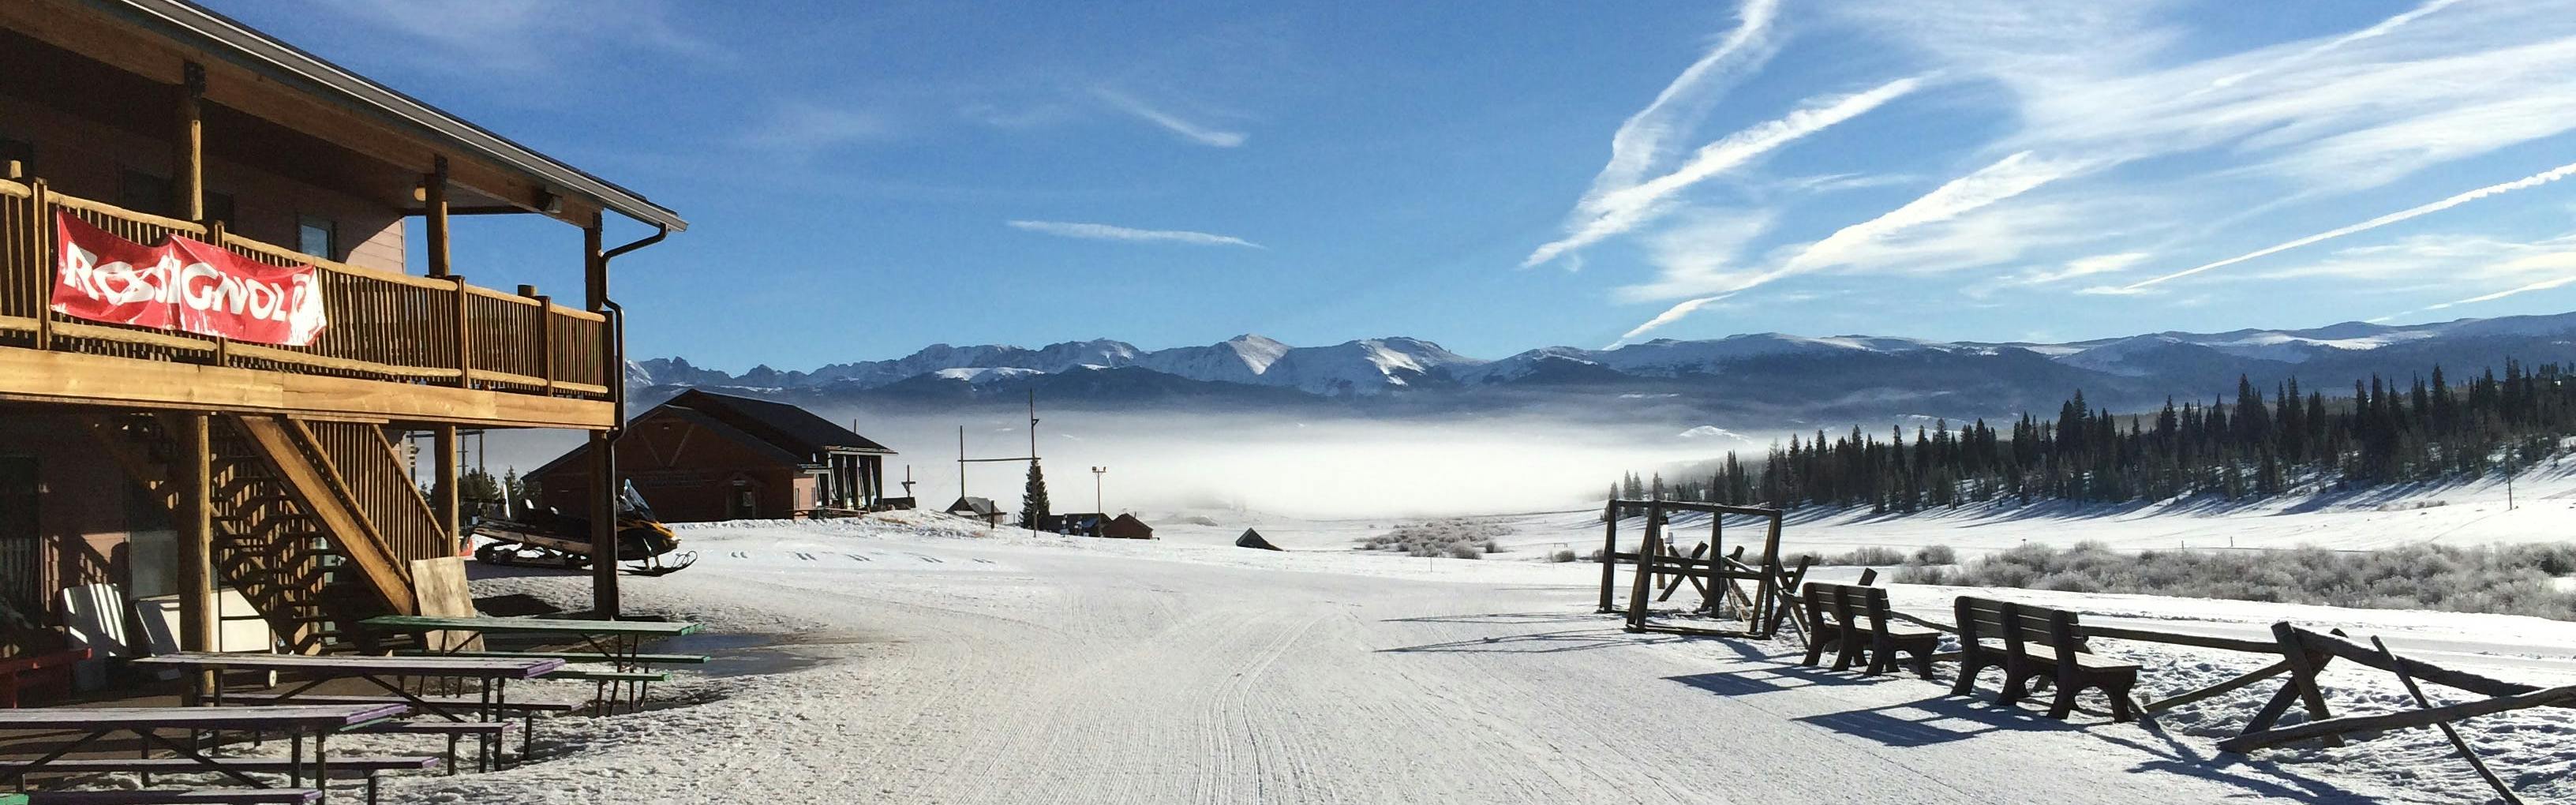 A snowy ski track with foggy mountains in the background. 